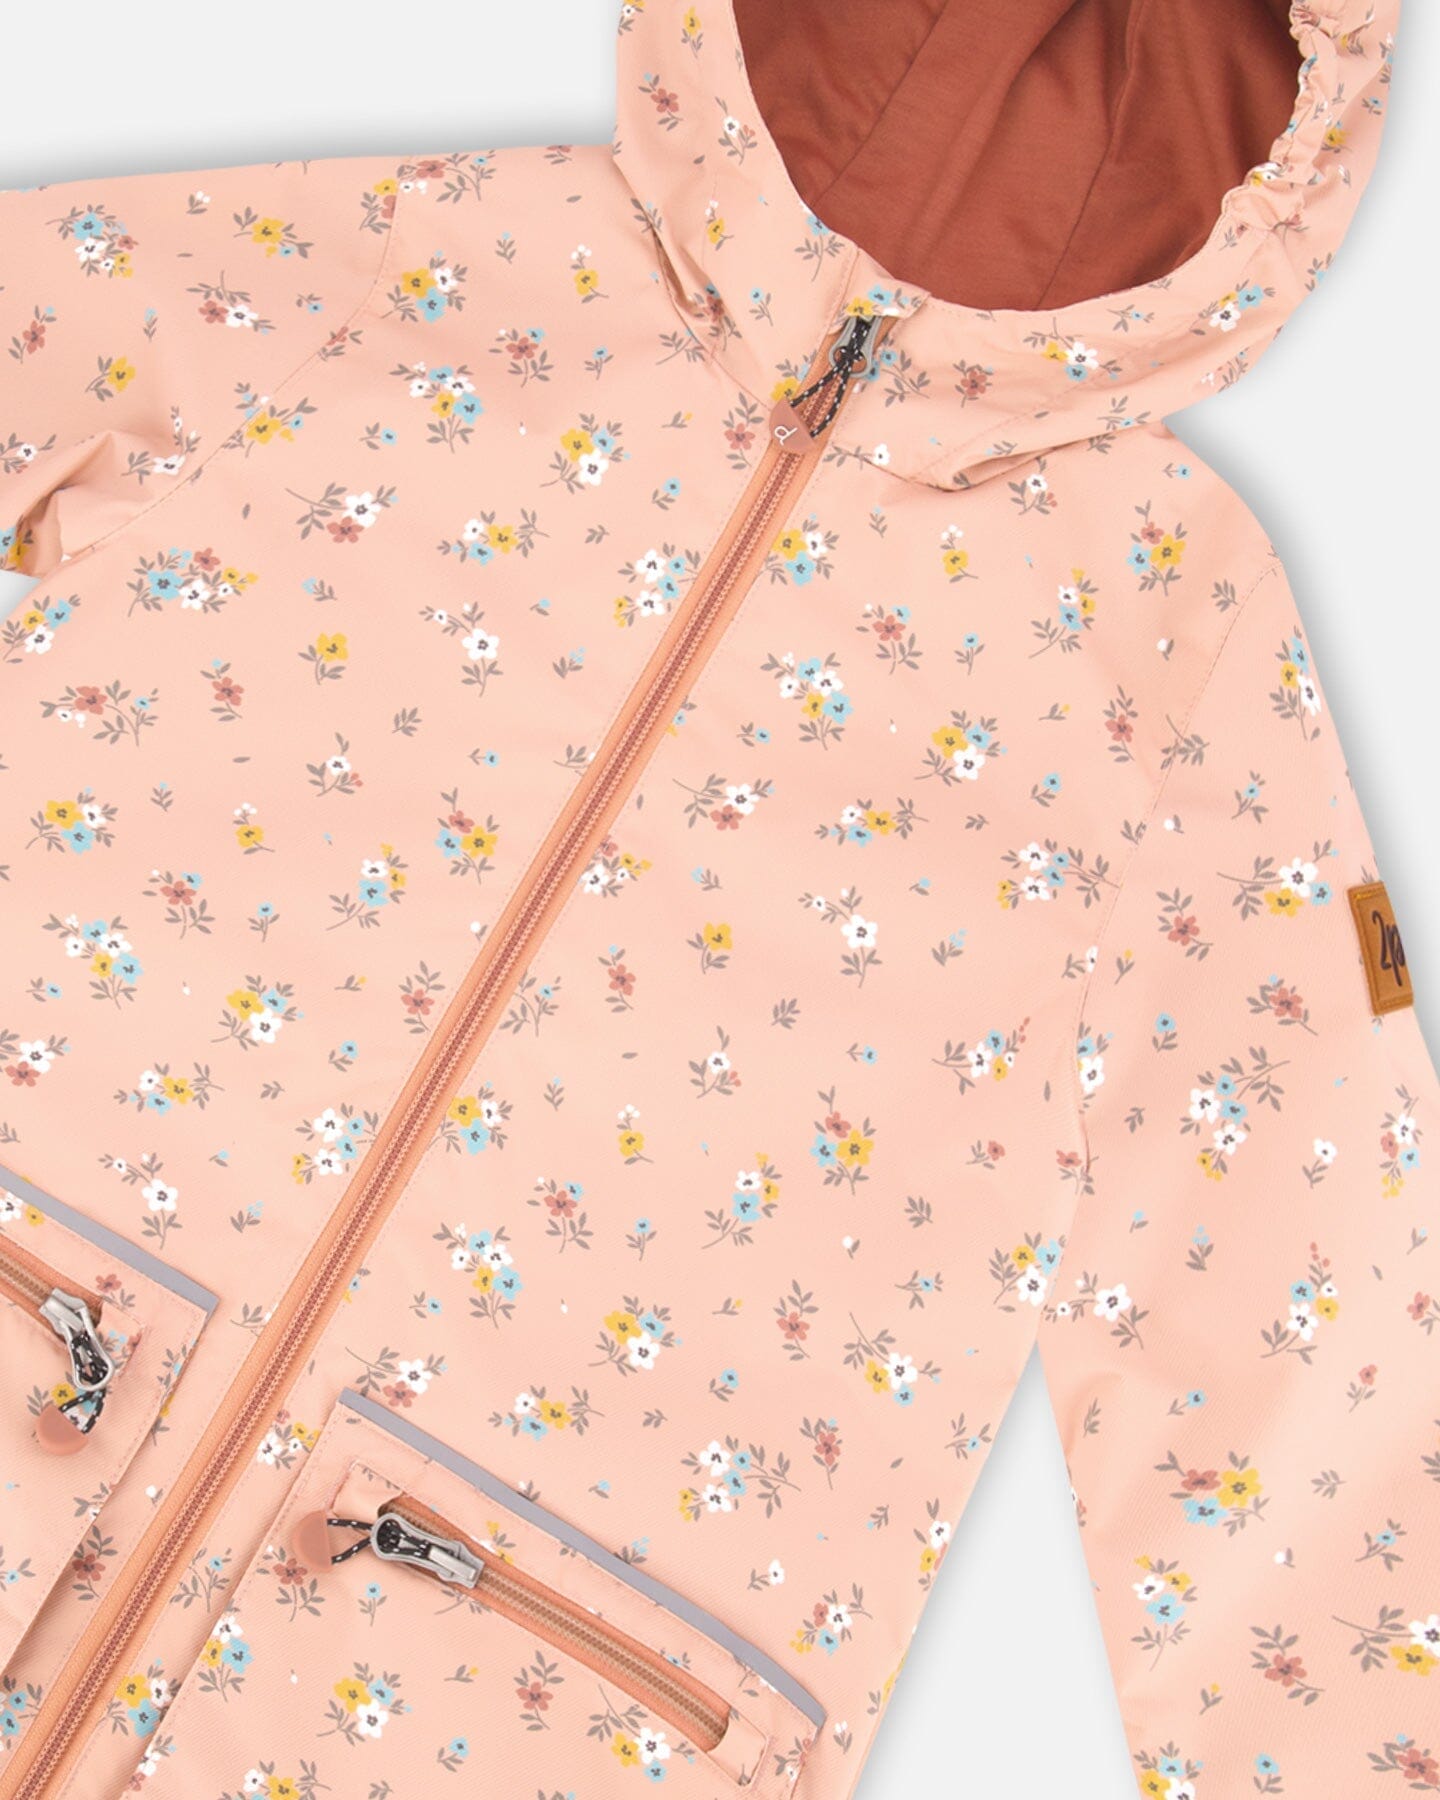 Printed Coat And Hat Set Pink Little Flowers Print - F30W97_011